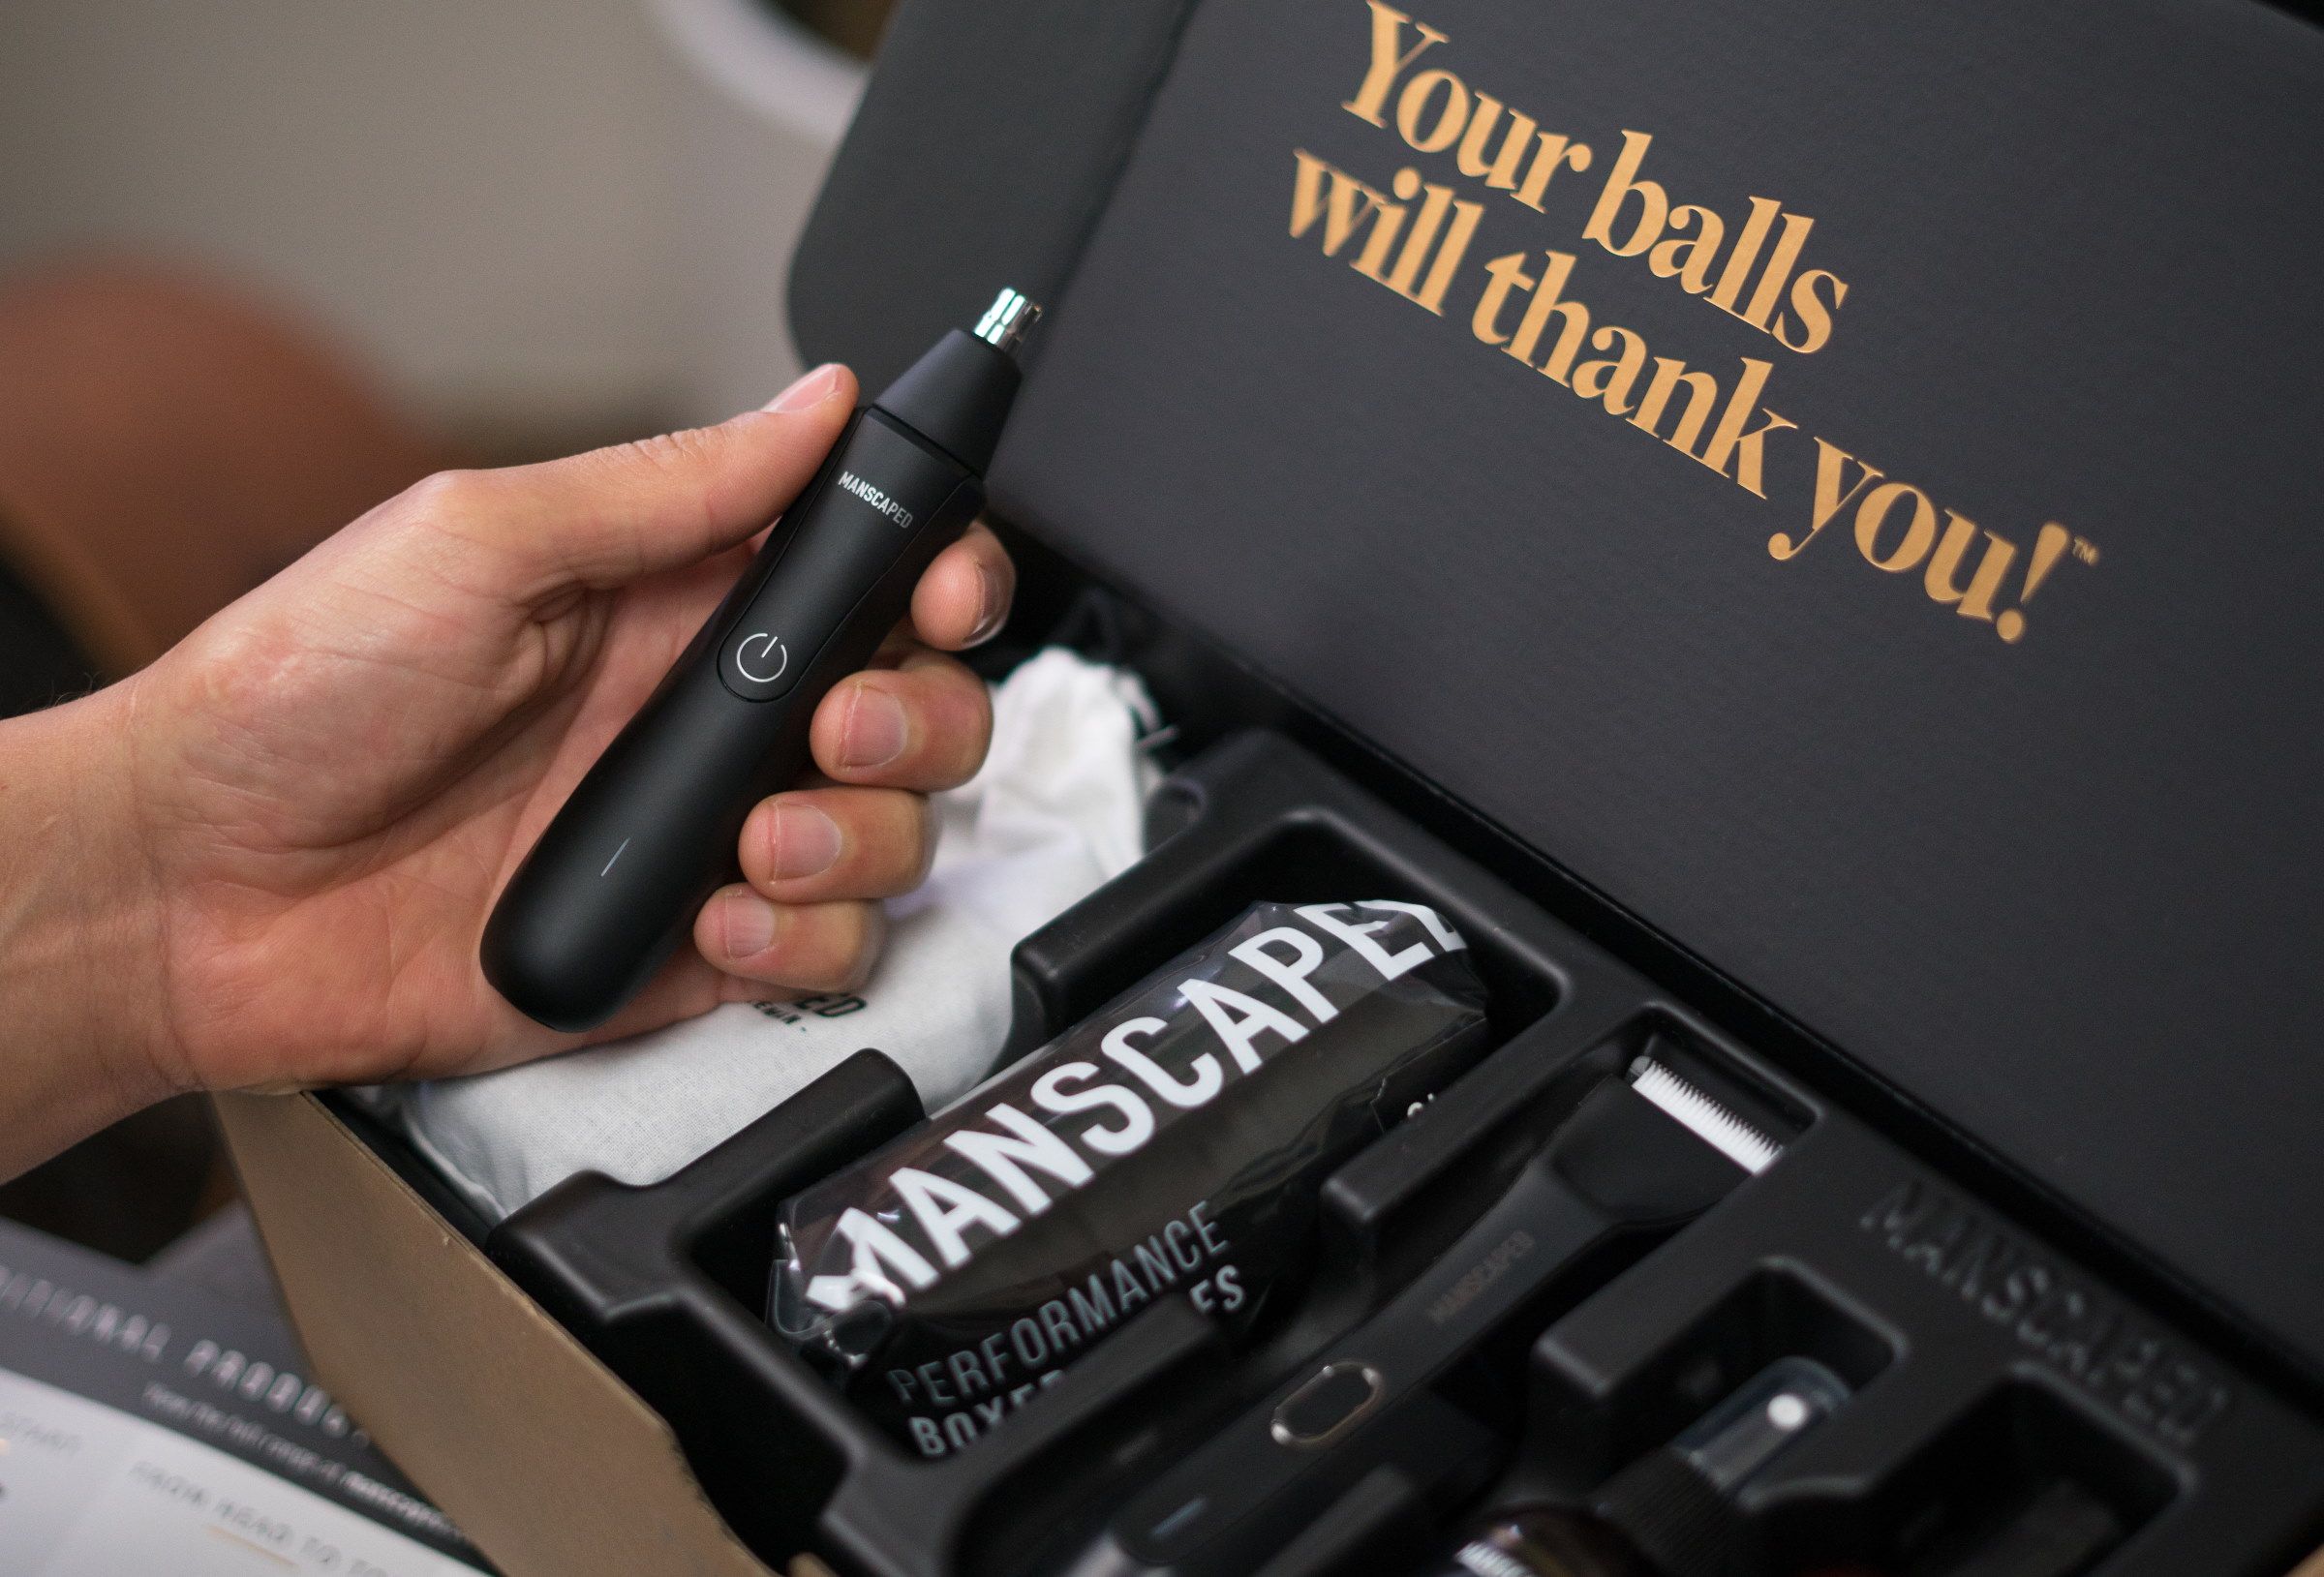 Global Grooming Company Manscaped Arrives In Singapore